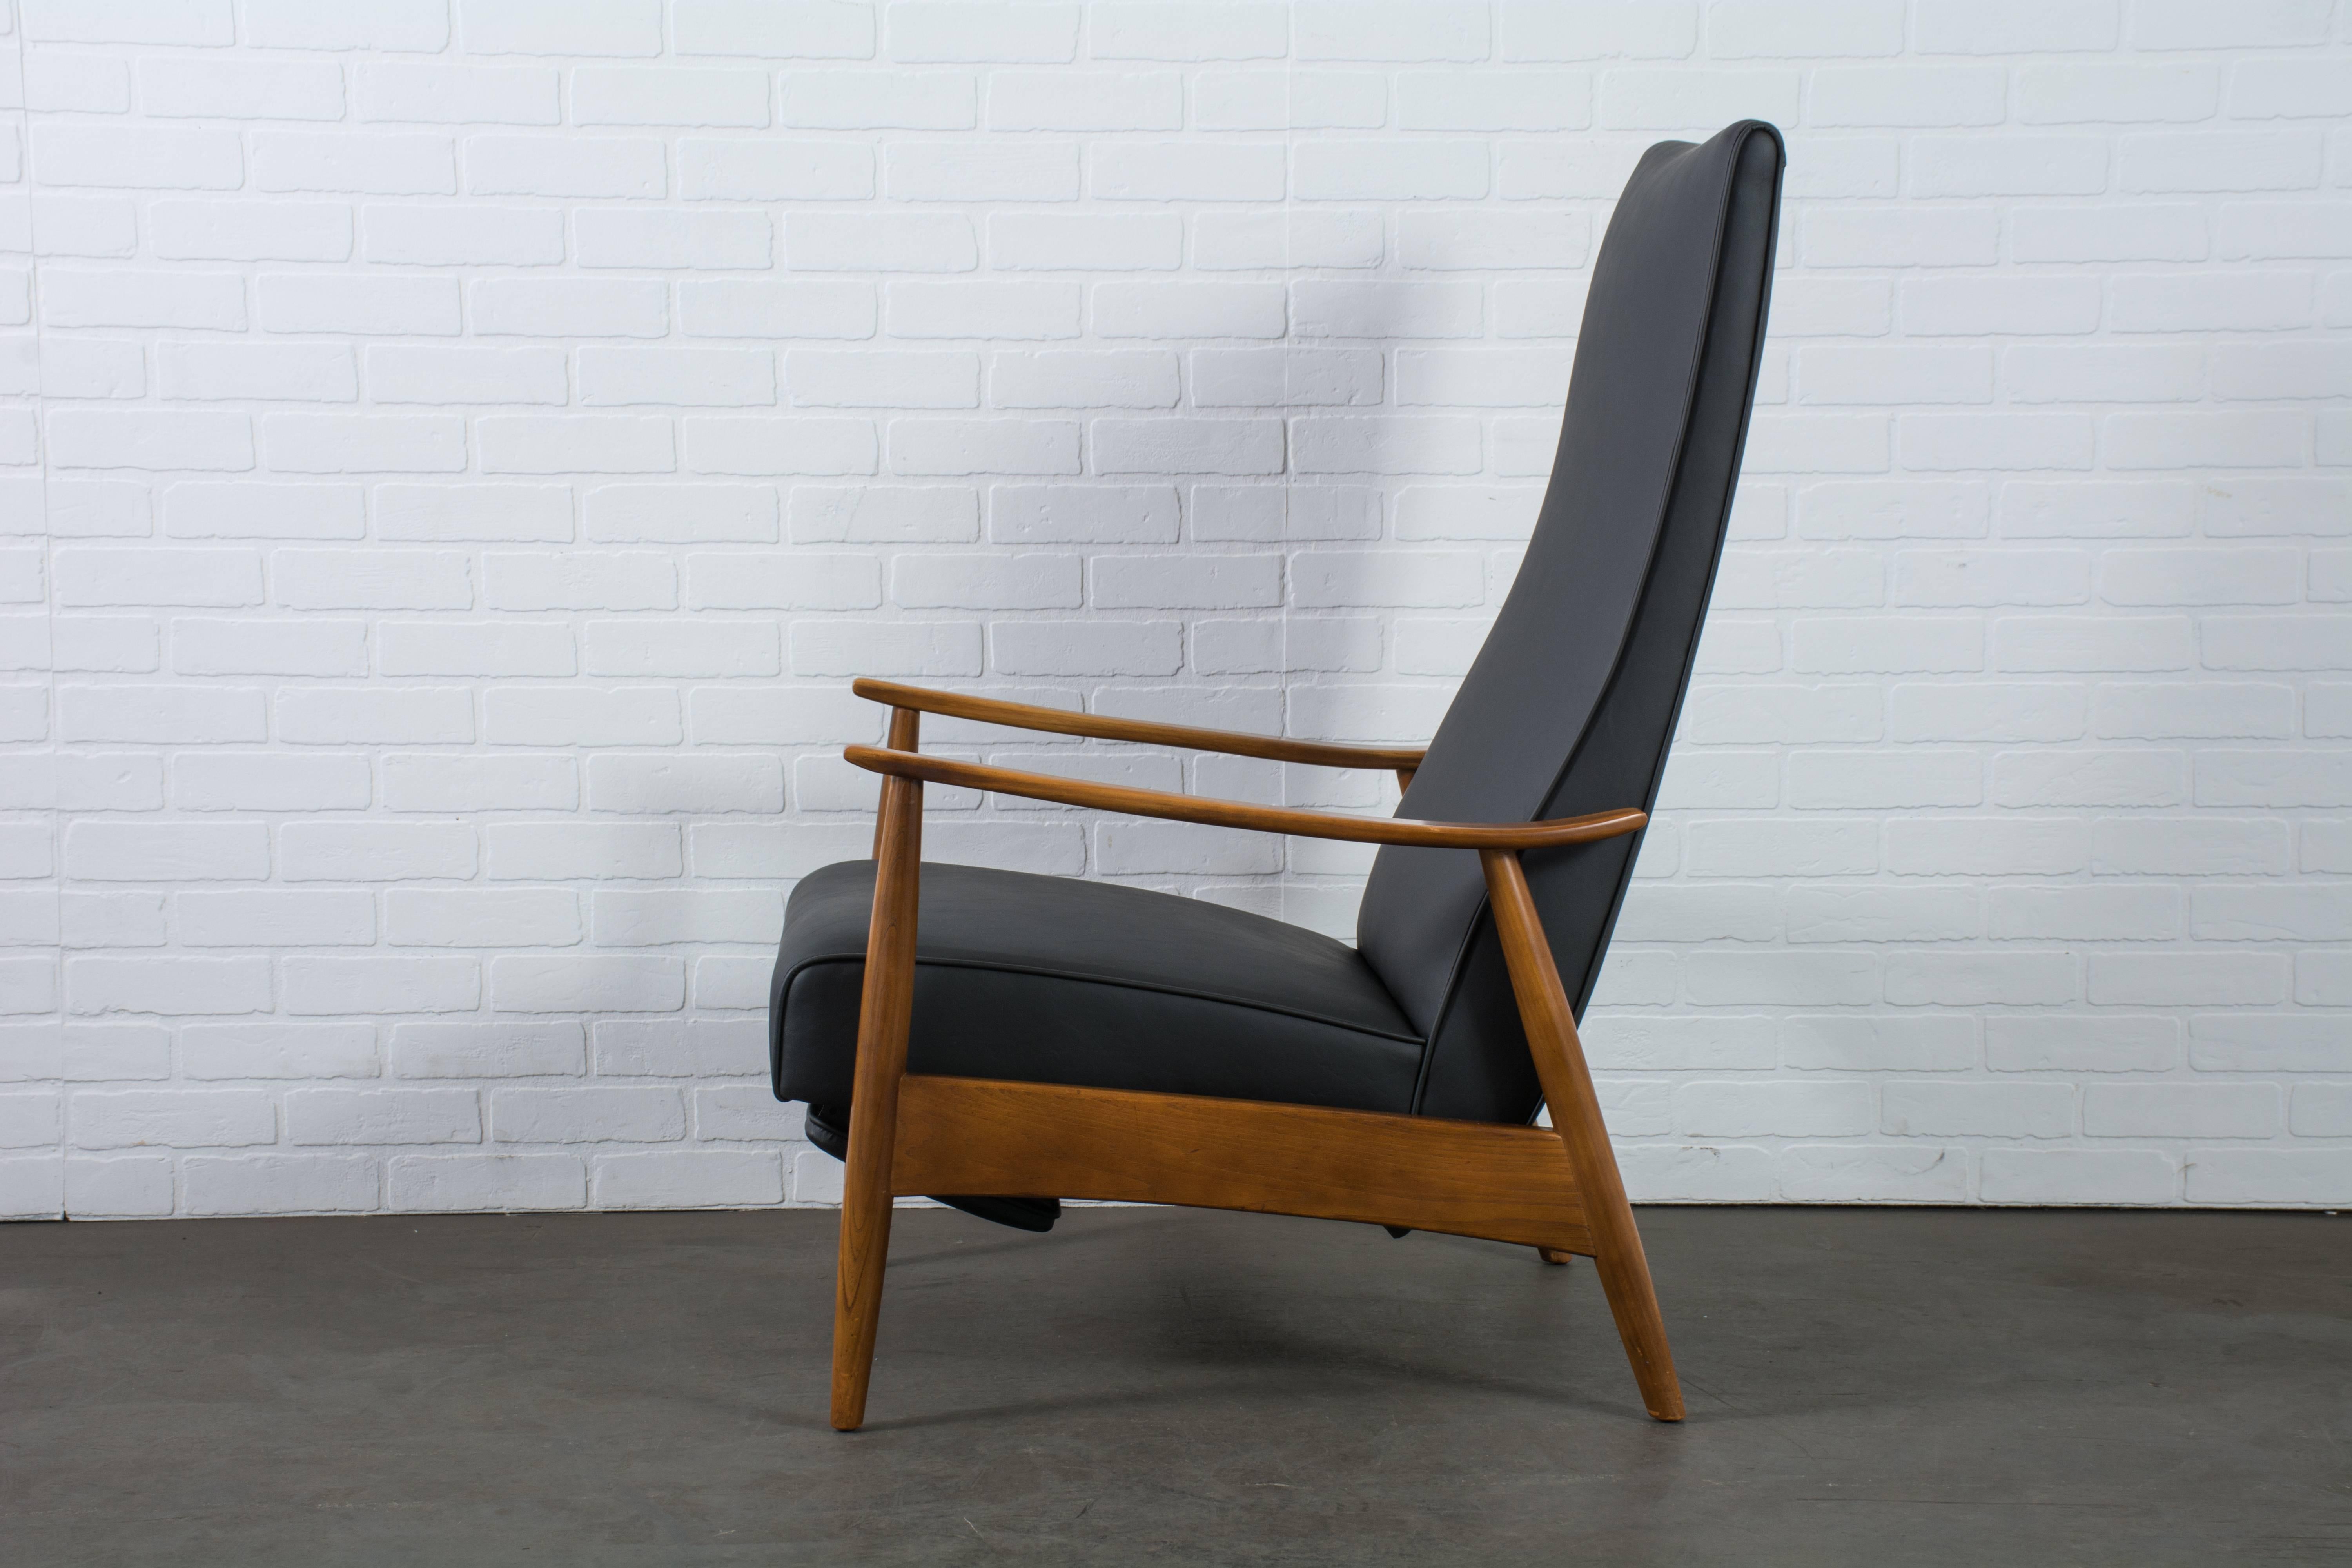 This Mid-Century Modern high back reclining lounge chair was designed by Milo Baughman in the 1960's. It has an oak frame and has been professionally reupholstered in black naugahyde. When used in a reclined position, the upholstered footrest comes